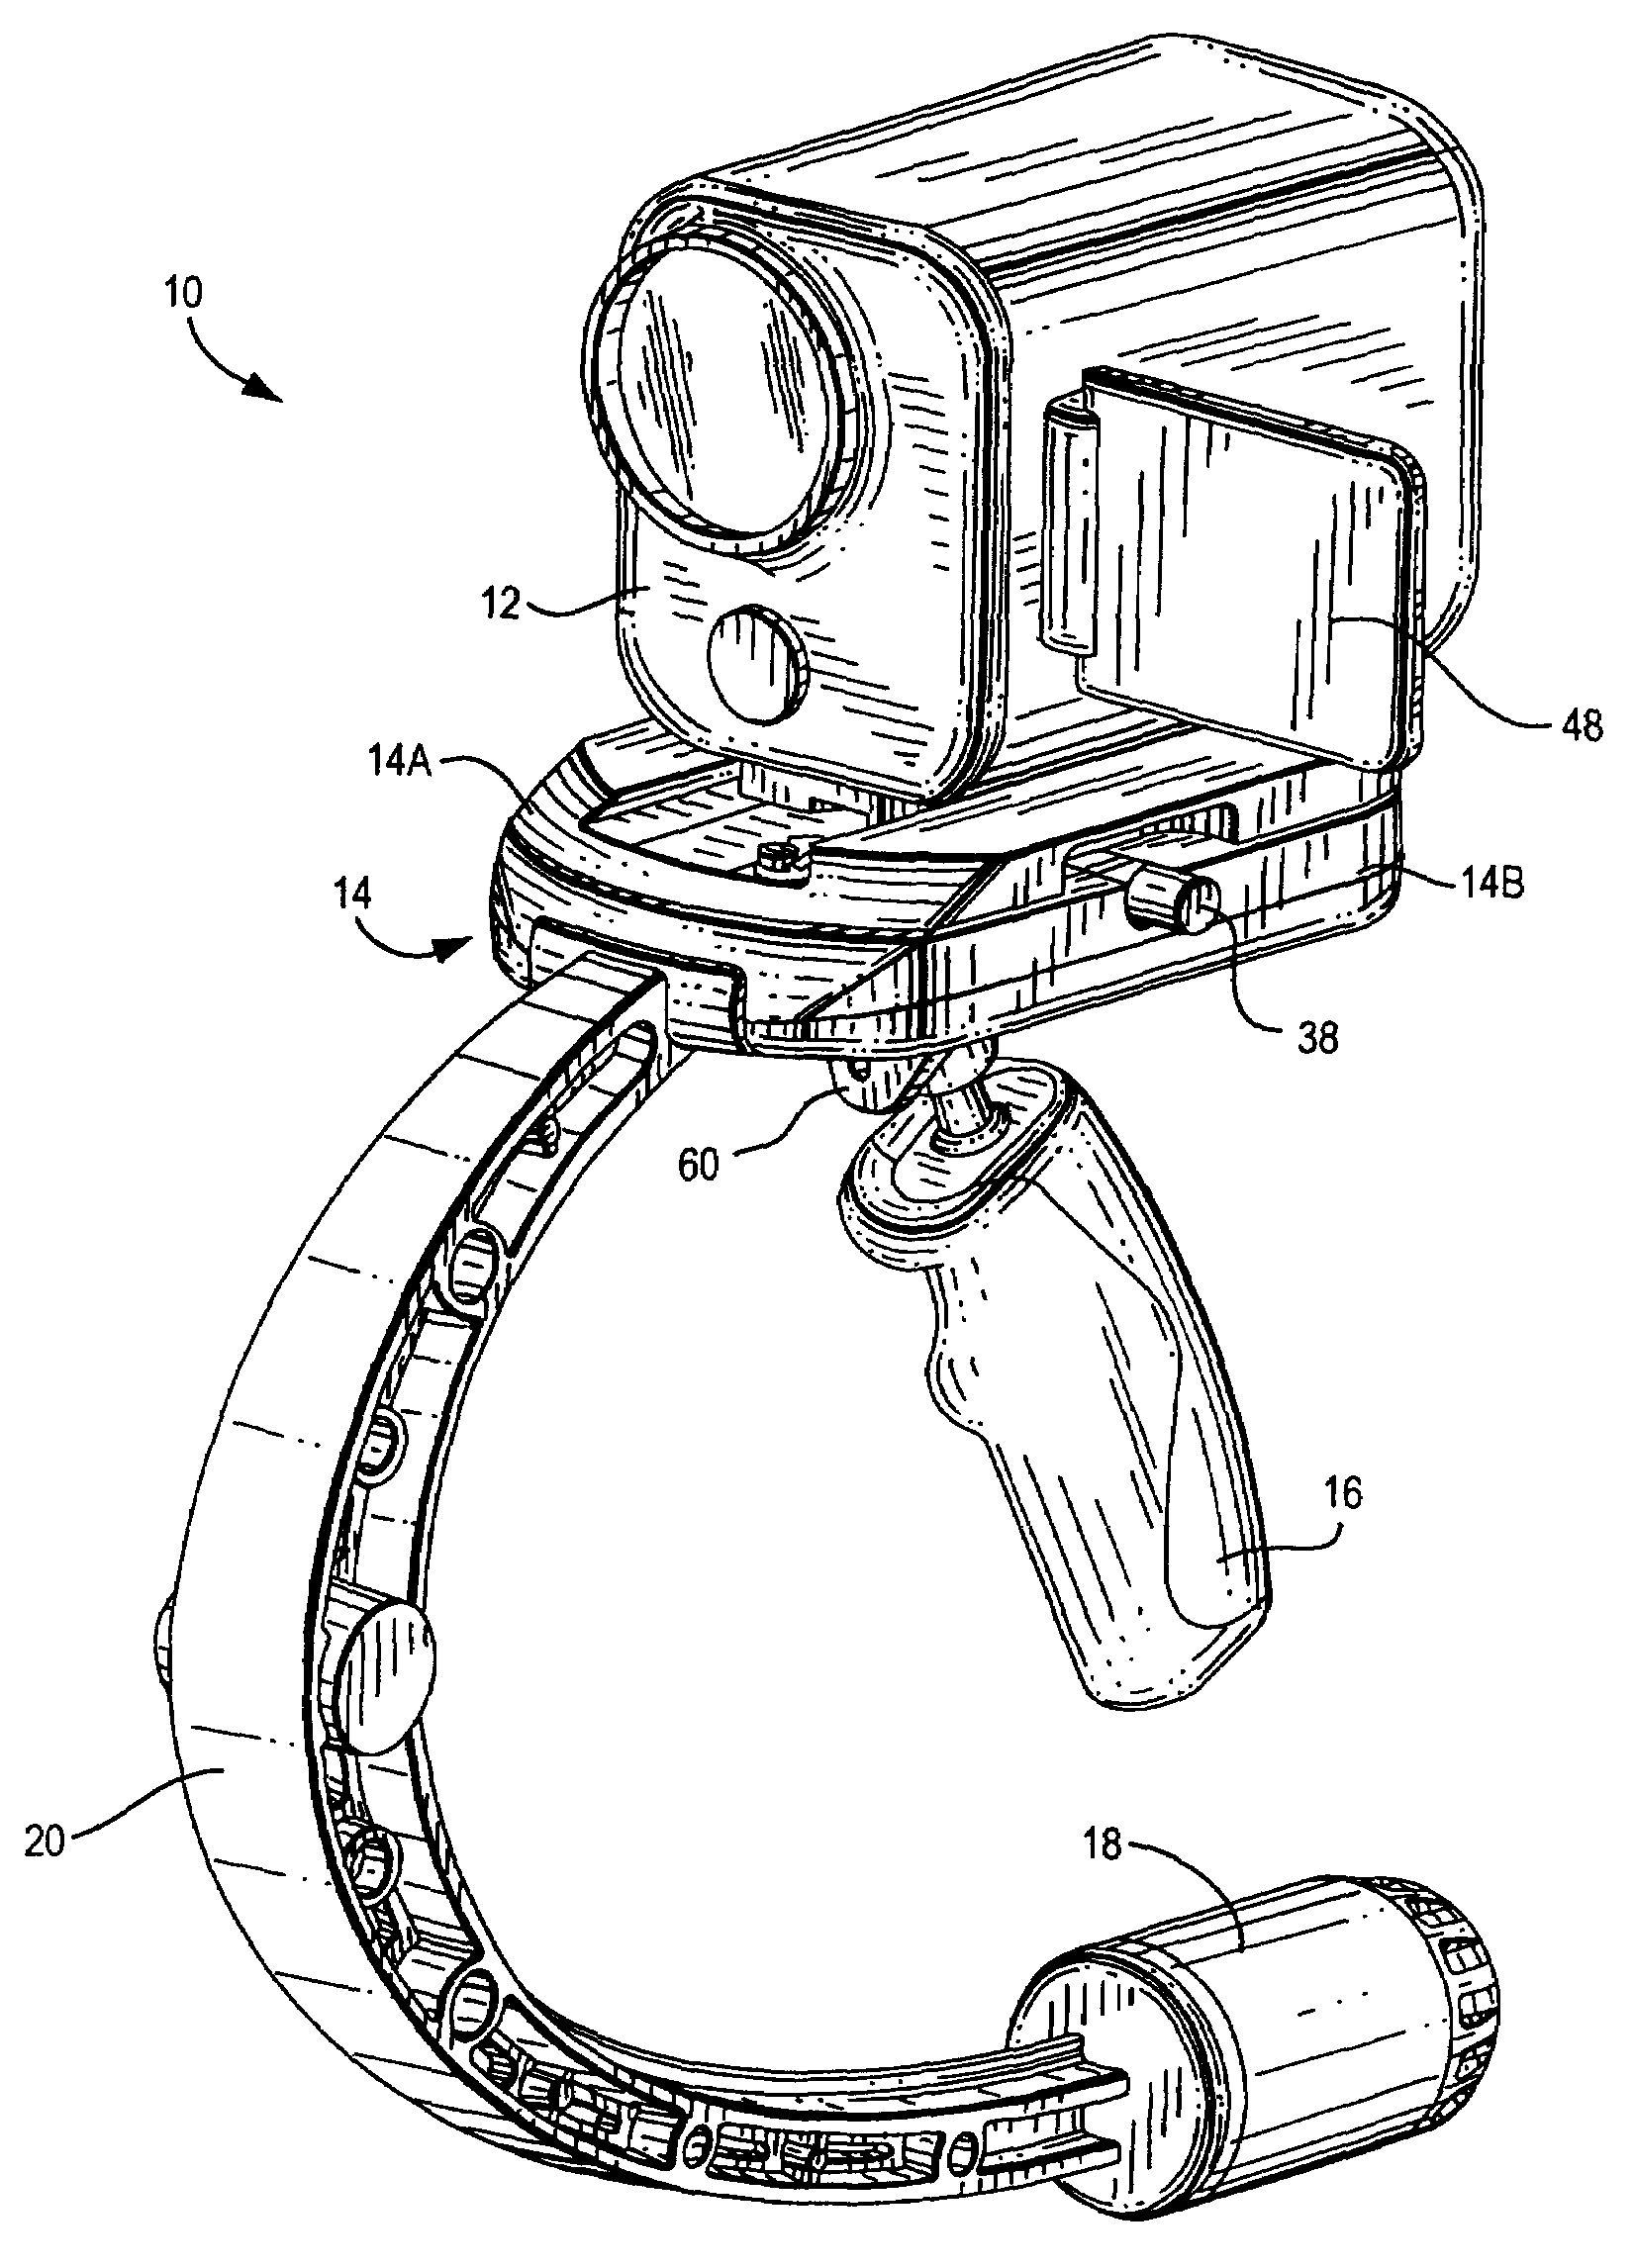 Stabilized equipment support and method of balancing same